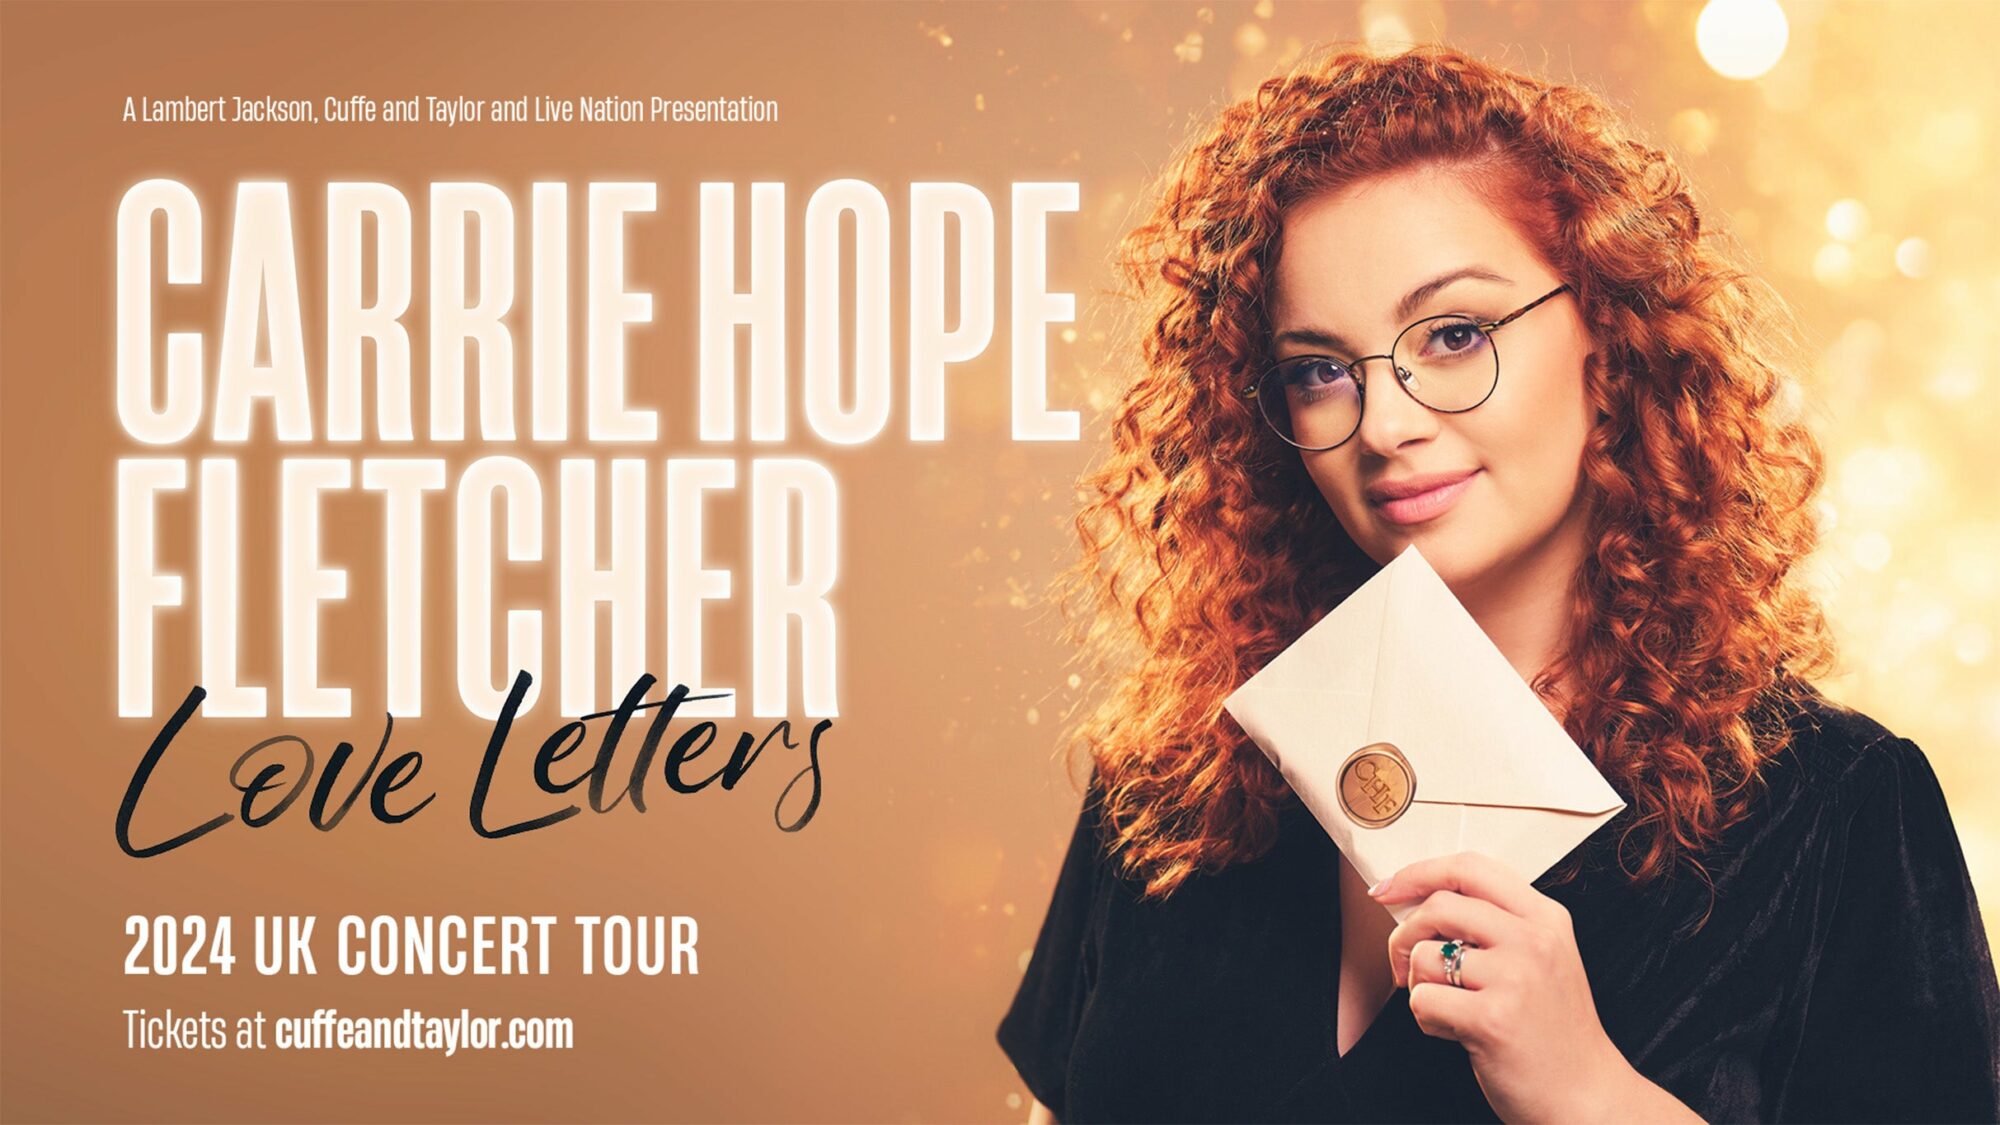 Image name Carrie Hope Fletcher Love Letters at York Barbican York the 17 image from the post Carrie Hope Fletcher: Love Letters at York Barbican, York in Yorkshire.com.